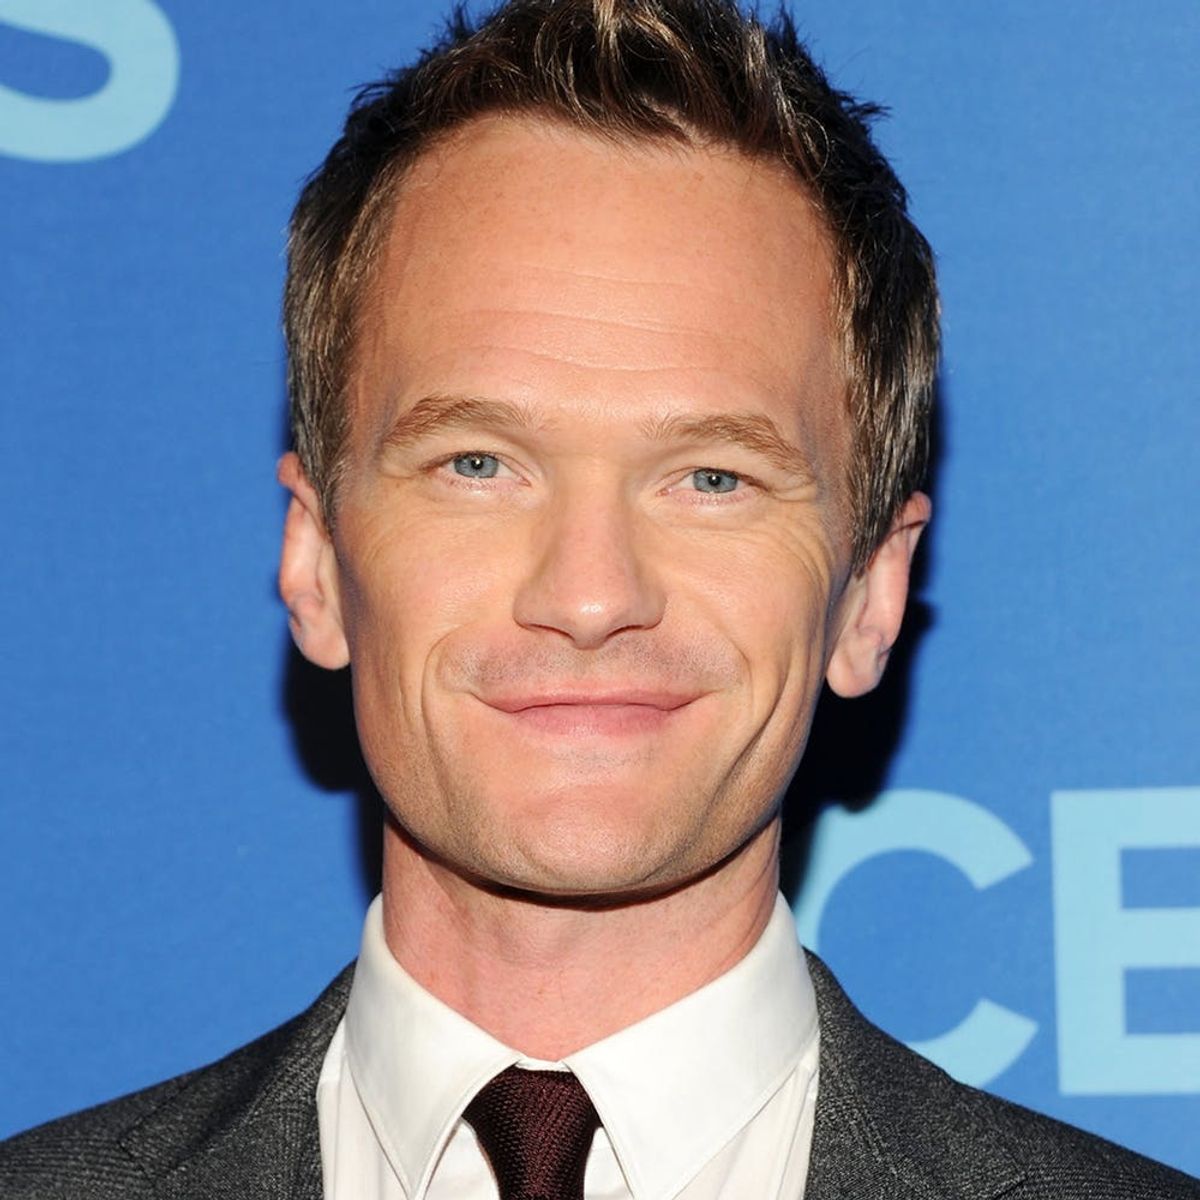 Neil Patrick Harris and His Family’s Halloween Costumes Are BEYOND Amazing